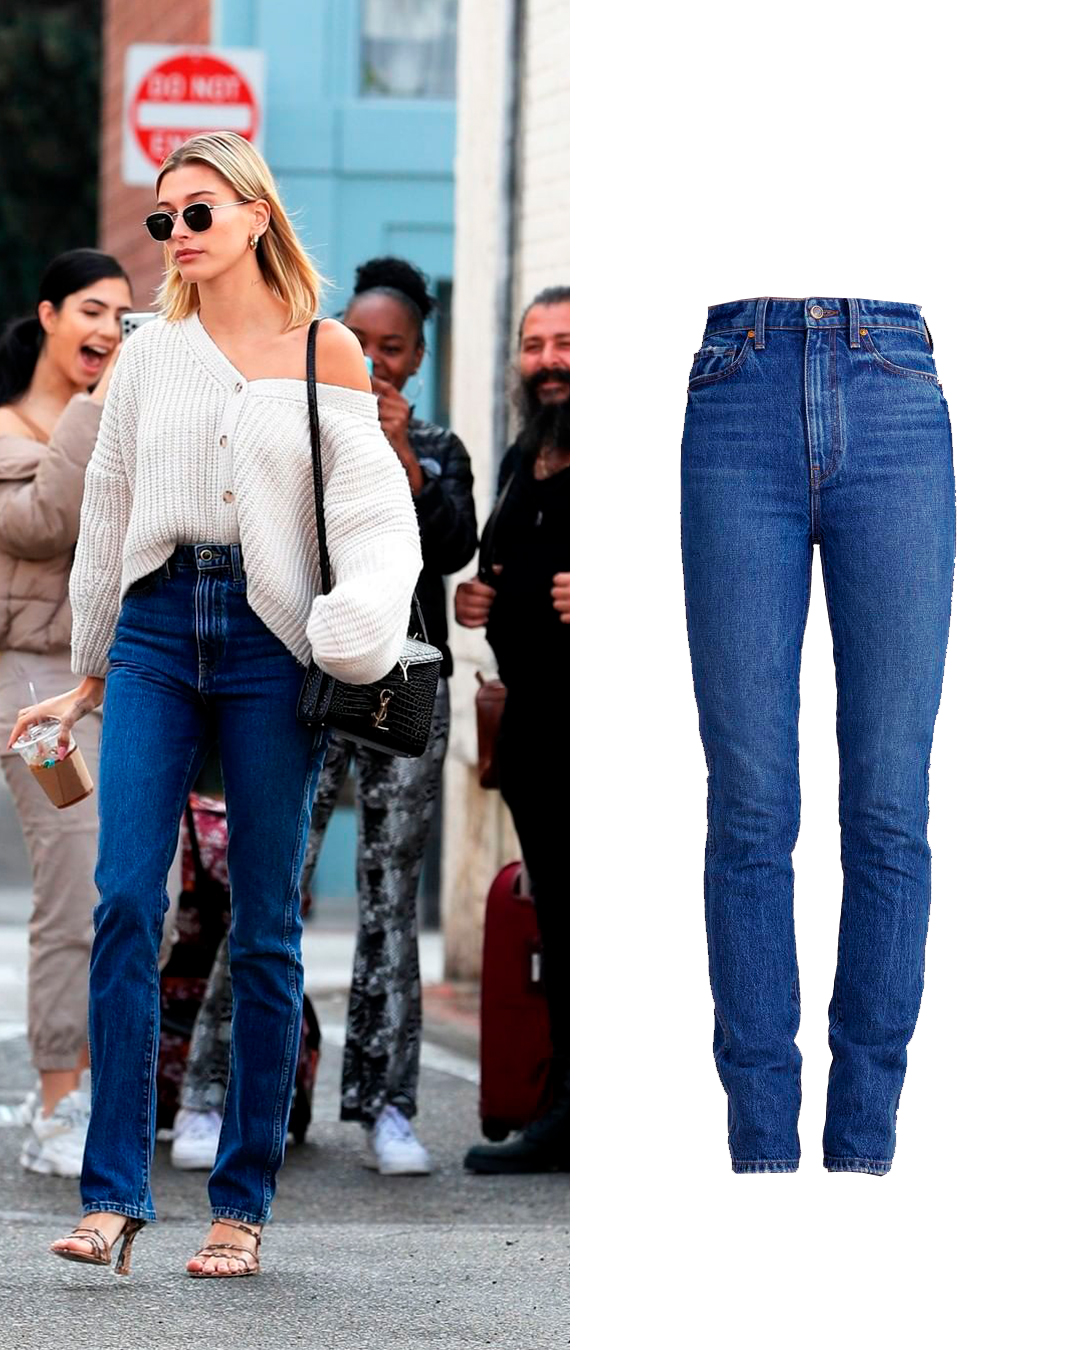 Kendall Jenner Is All About Her Straight Leg Jeans